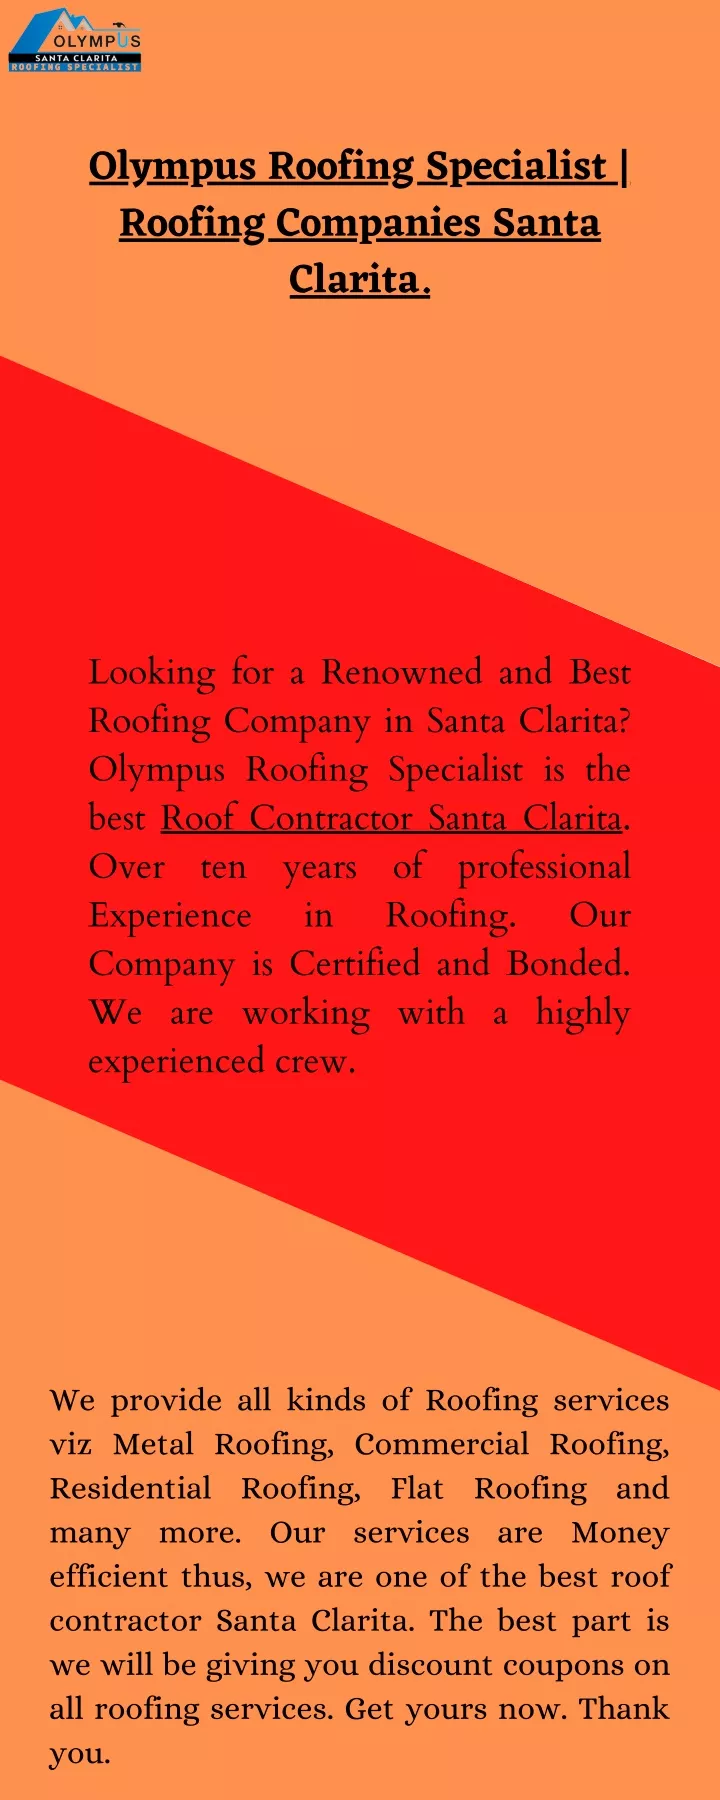 olympus roofing specialist roofing companies